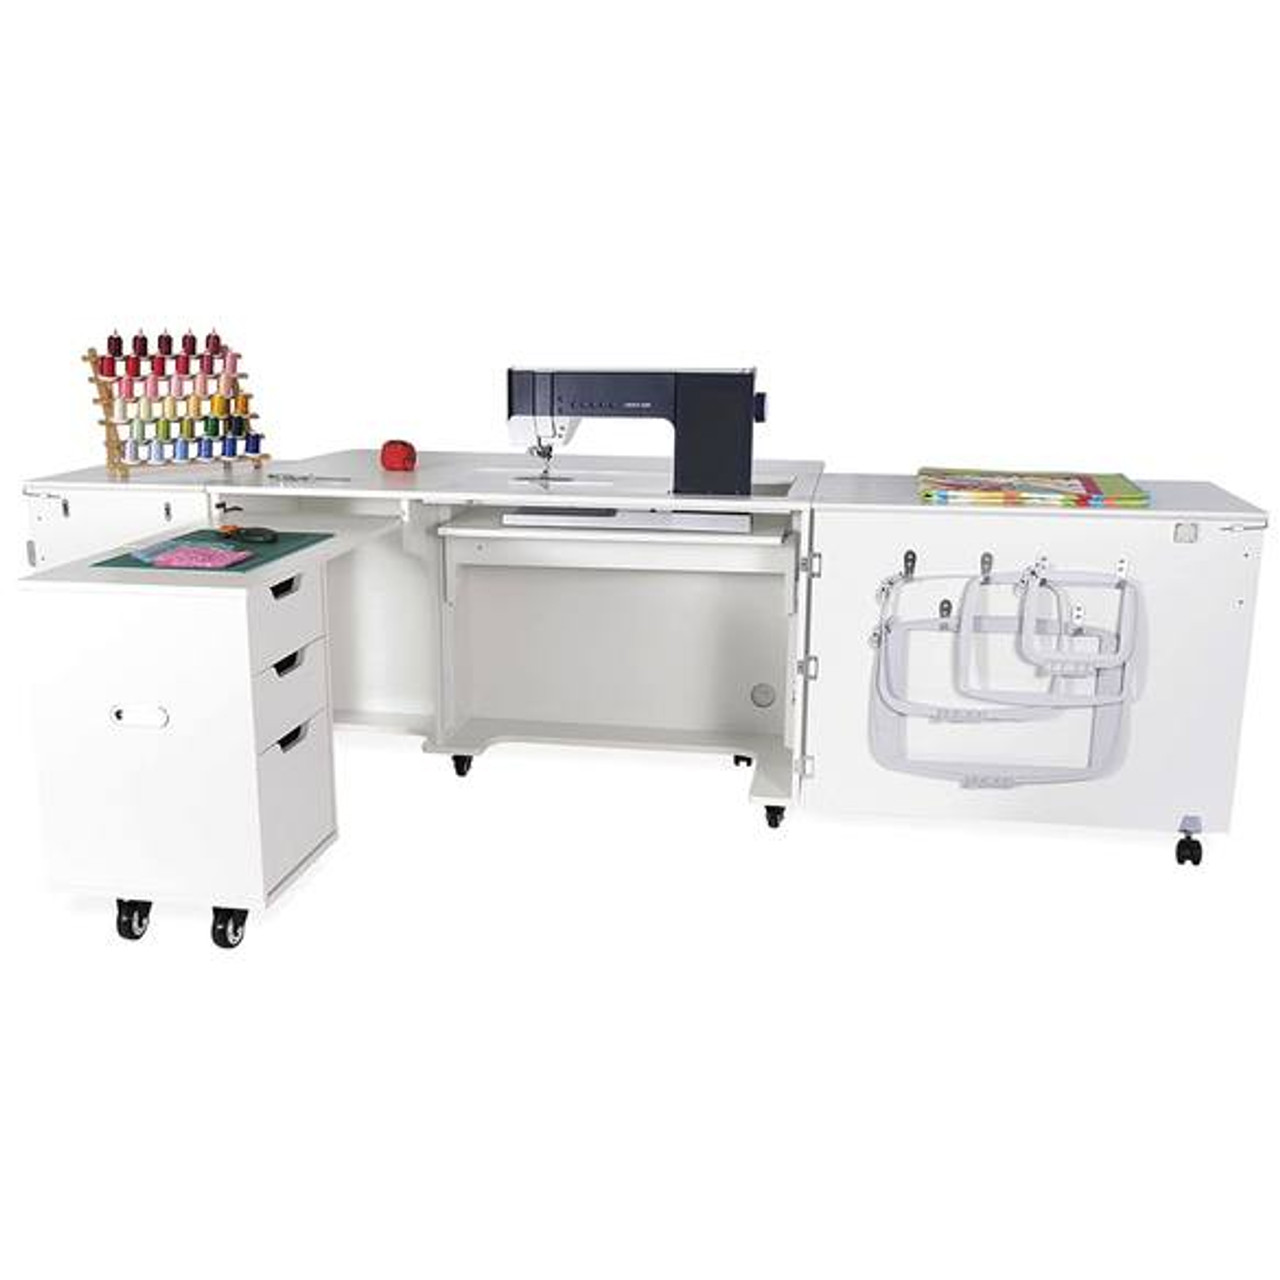 Horn Model 8090 Sewing Cabinet